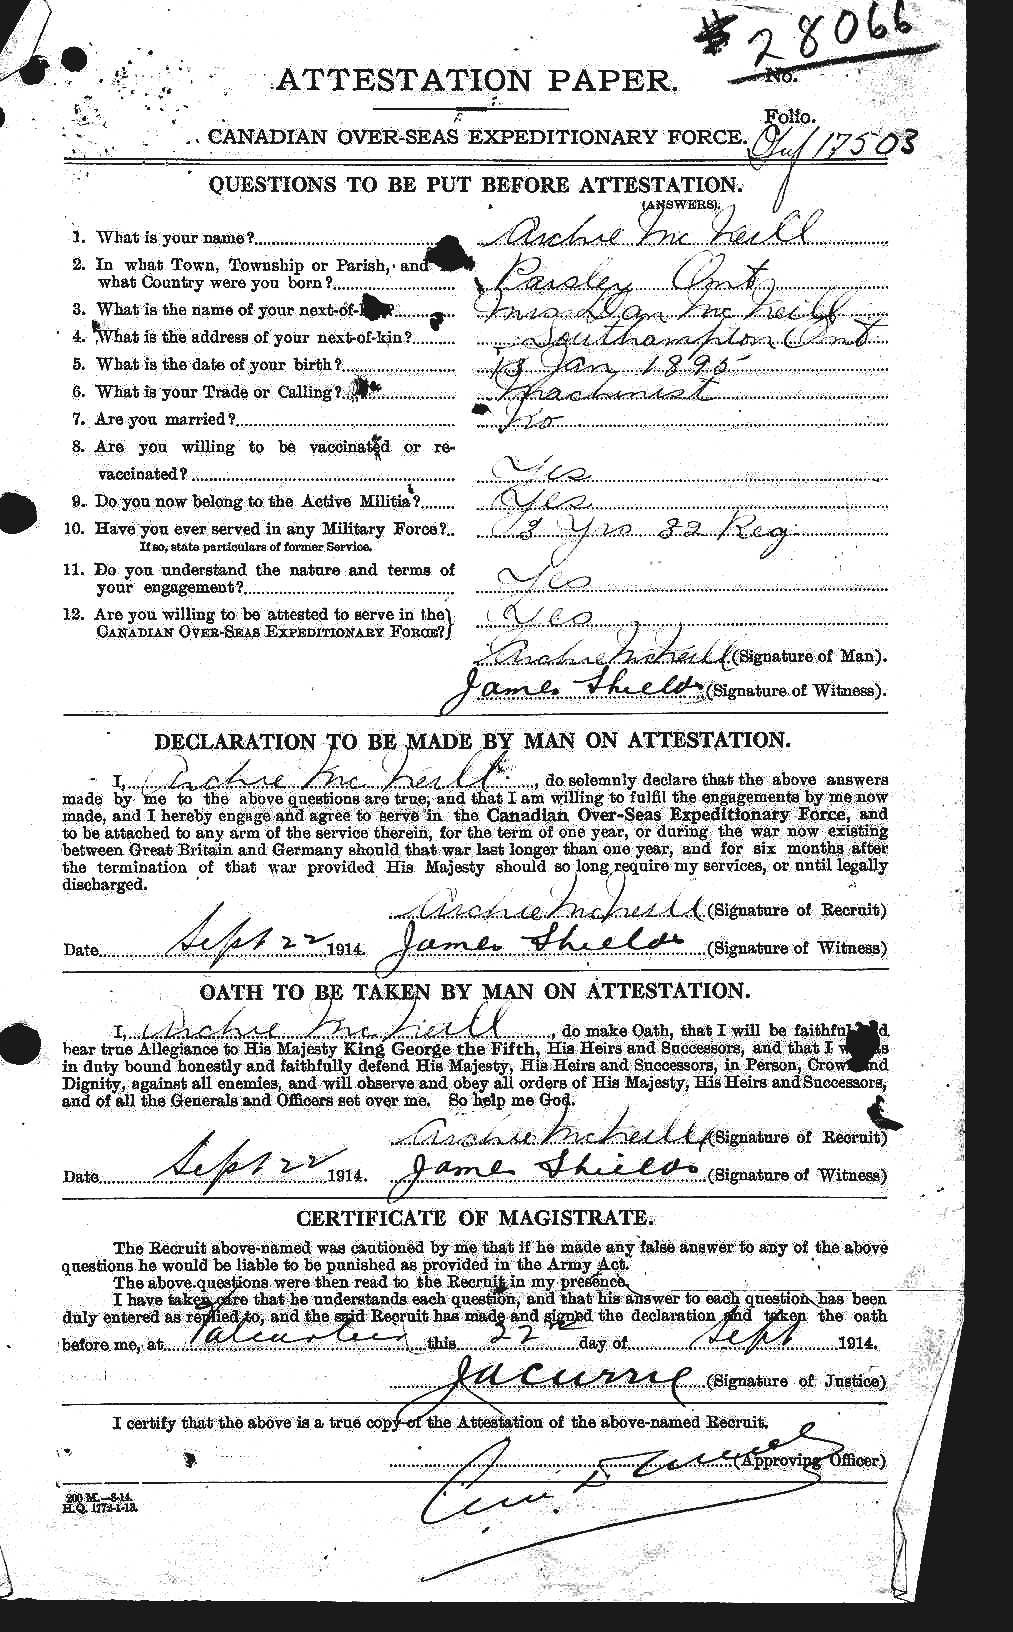 Personnel Records of the First World War - CEF 535908a